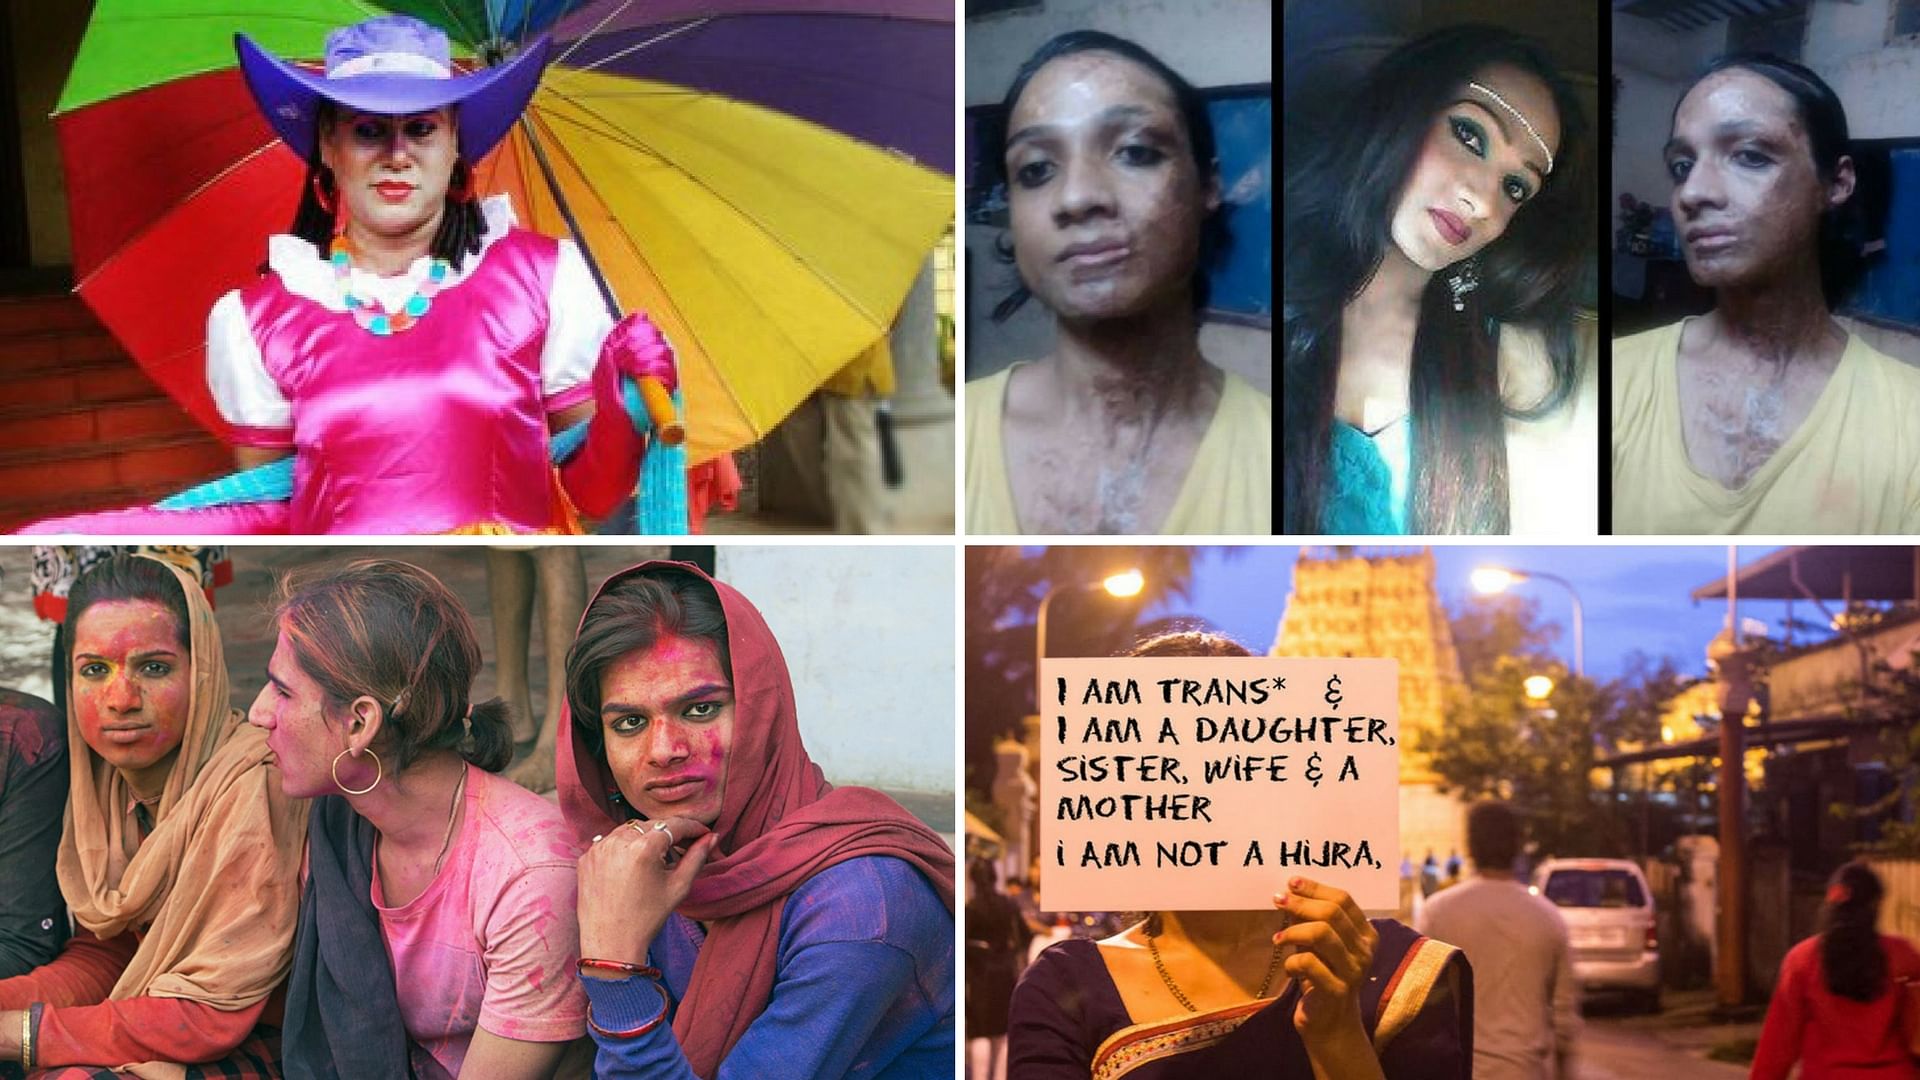 Violence against transgender people is rampant across India. On 20 November, we take a moment to honour victims of anti-transgender violence.